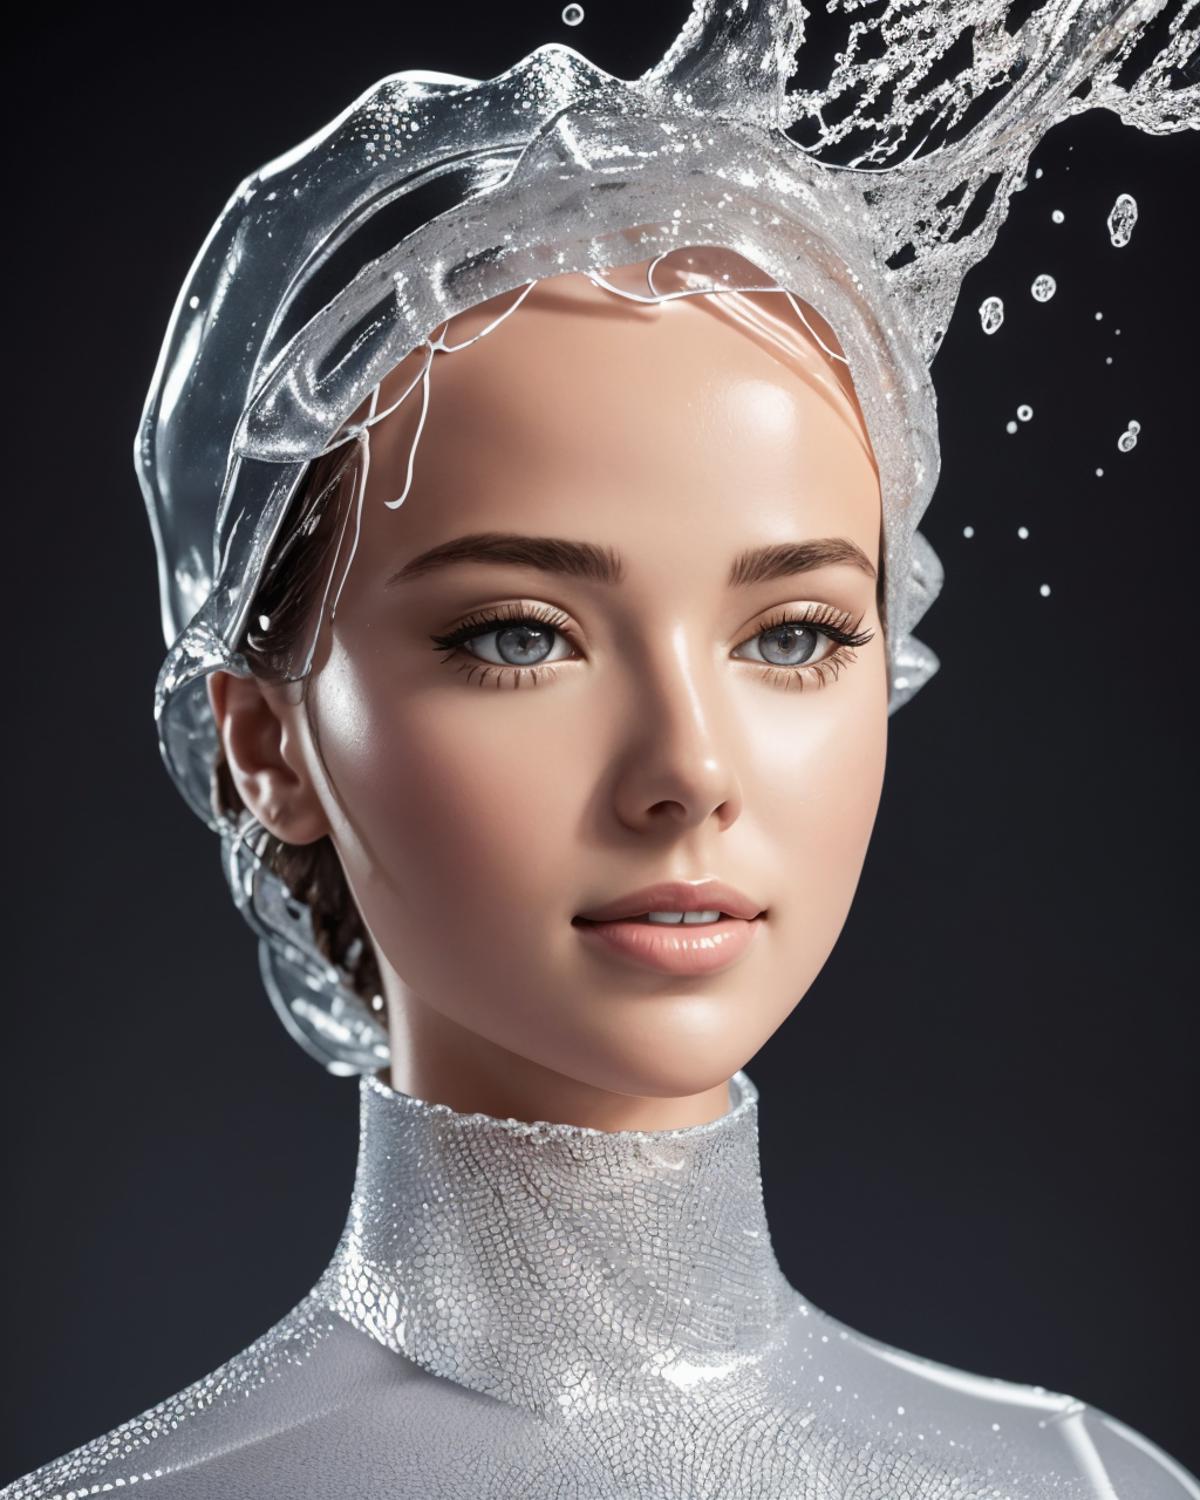 AI model image by getphat